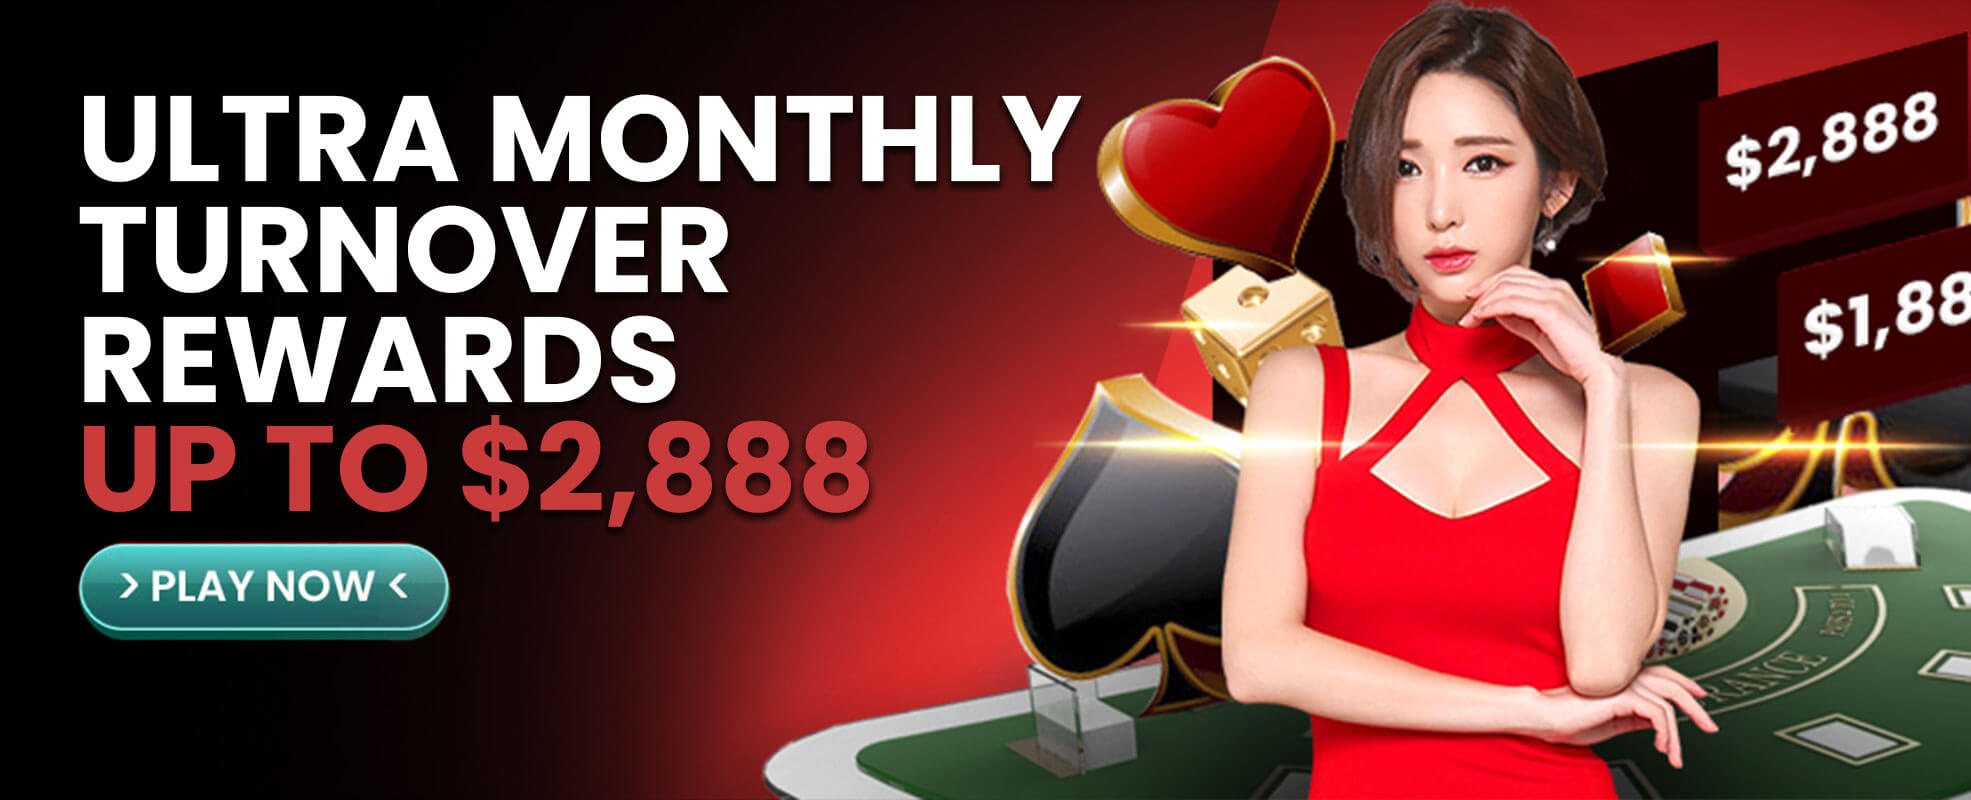 Ultra Monthly Turnover Rewards Up To $2888